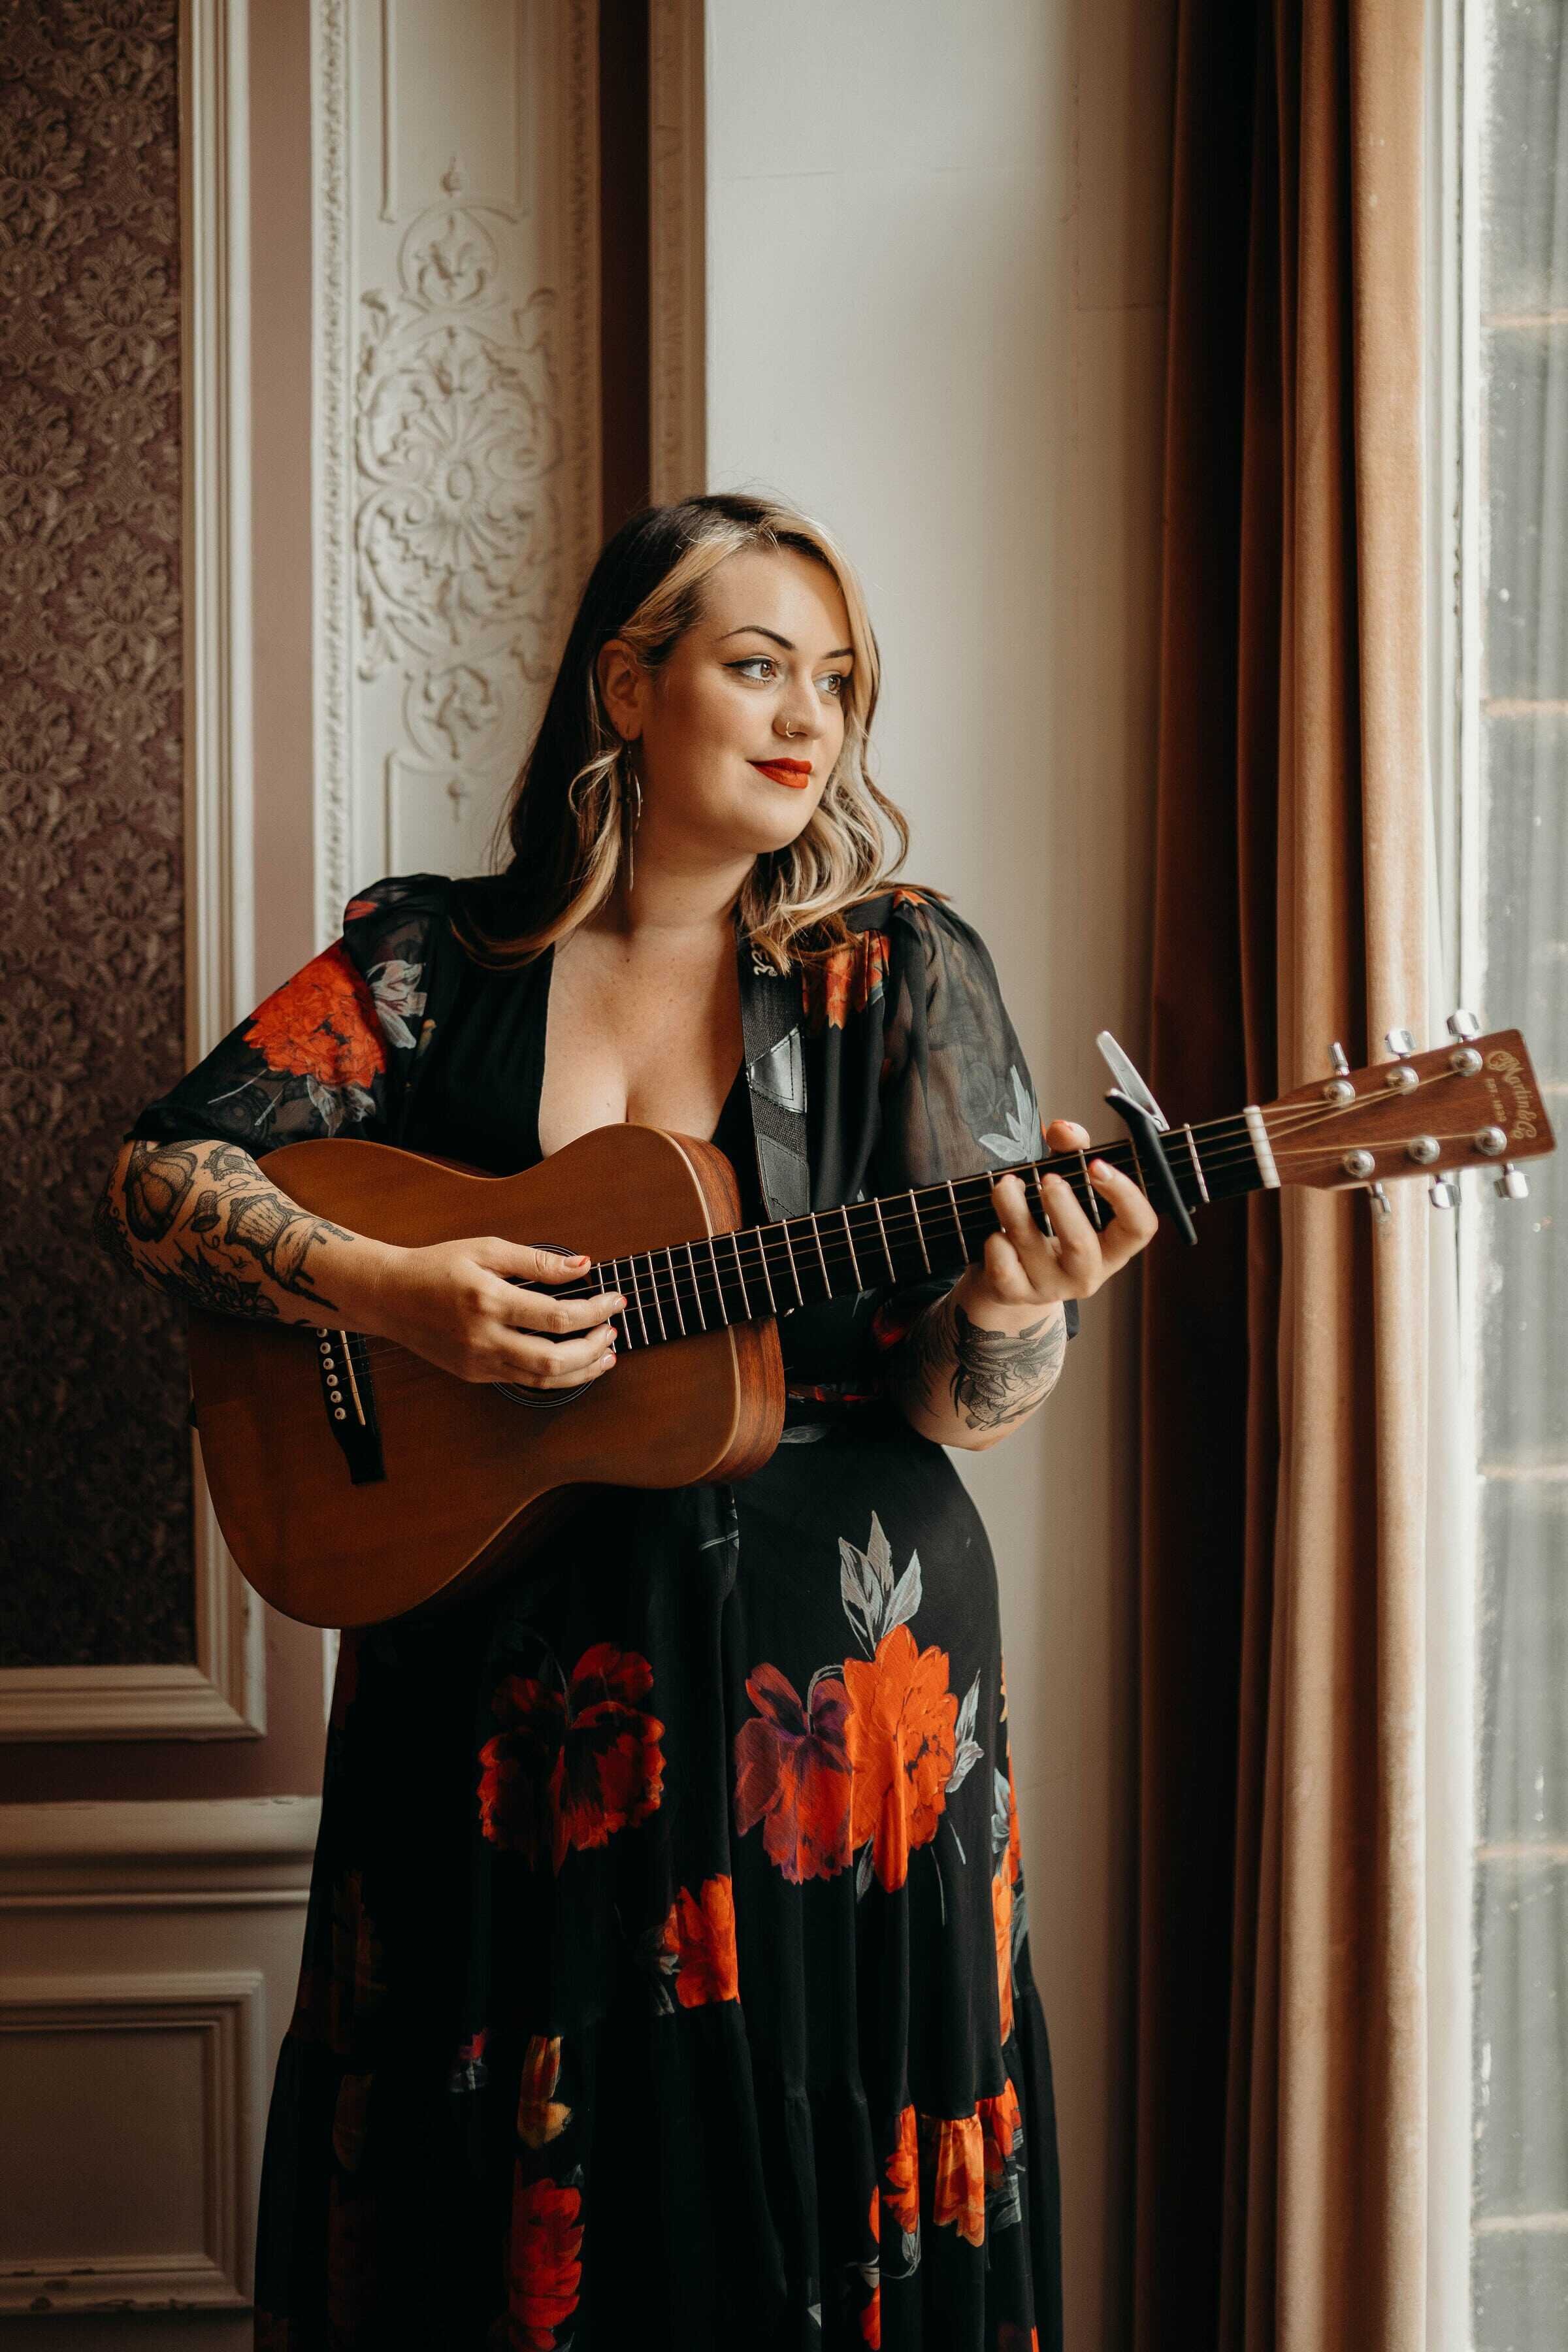  Photo Credit: Charlotte Jane Photography  Wedding singer and guitarist is stood in a grand room looking out of a window whilst playing an acoustic guitar. She is wearing a long dress with short sleeves  which is black with large red flowers printed 